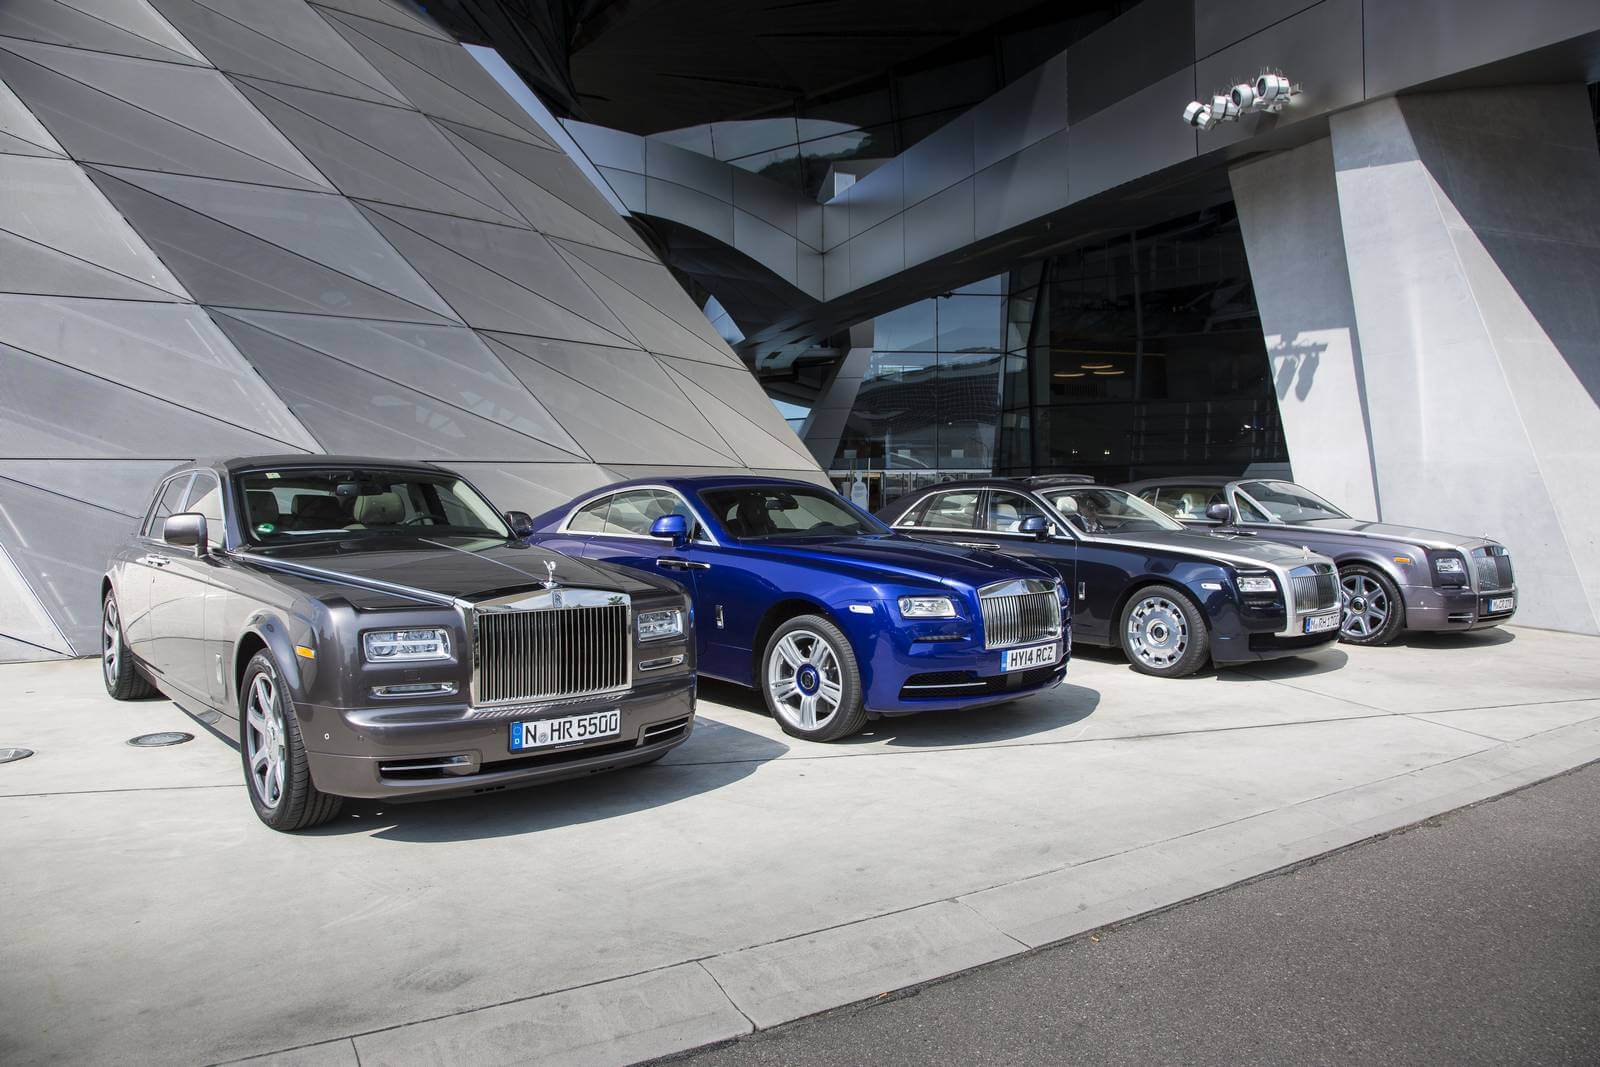 10 Riveting Facts About Rolls-Royce That Will Shock You